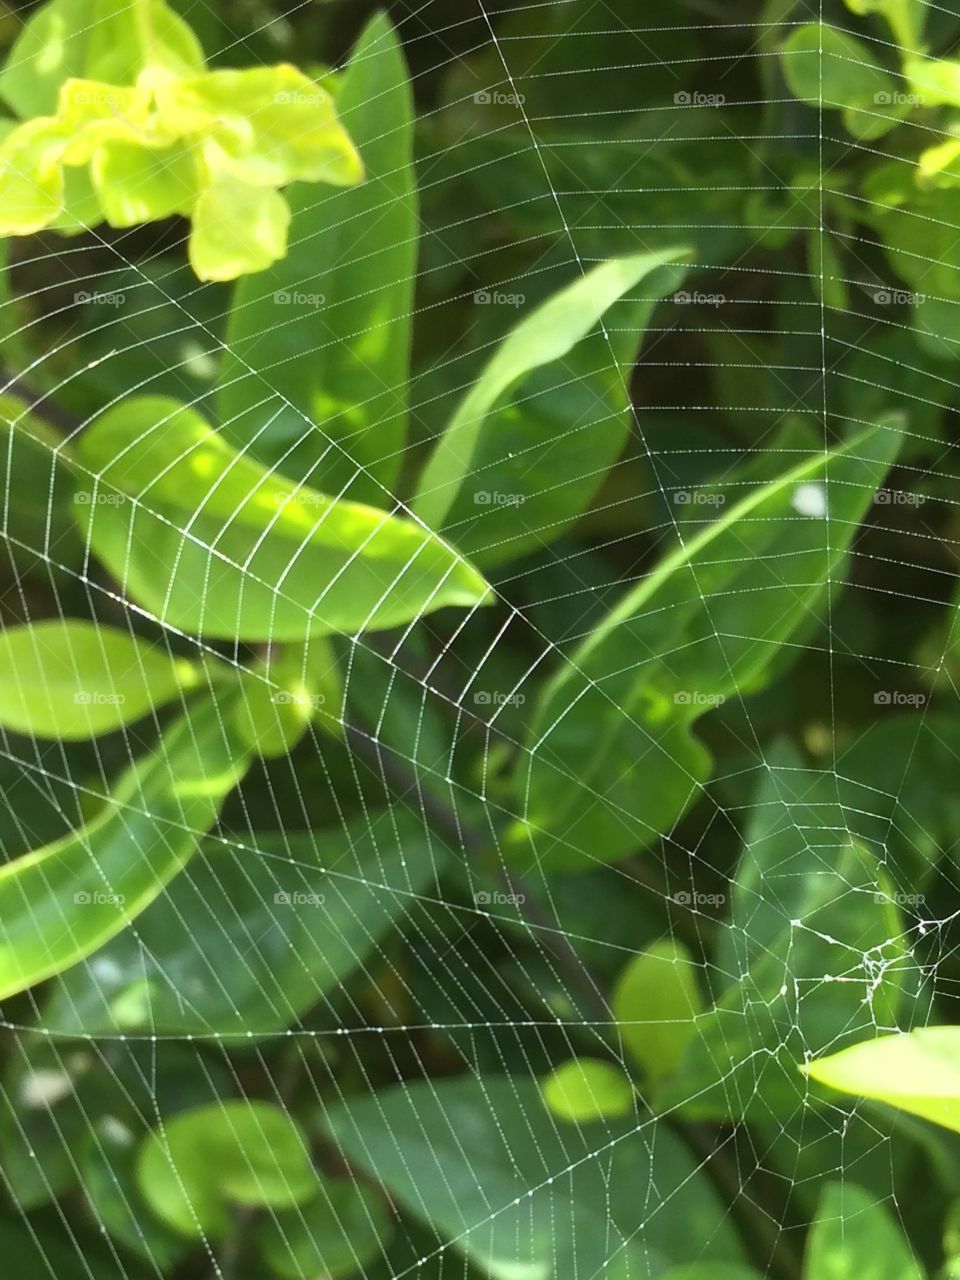 Spiderweb and green leafs 